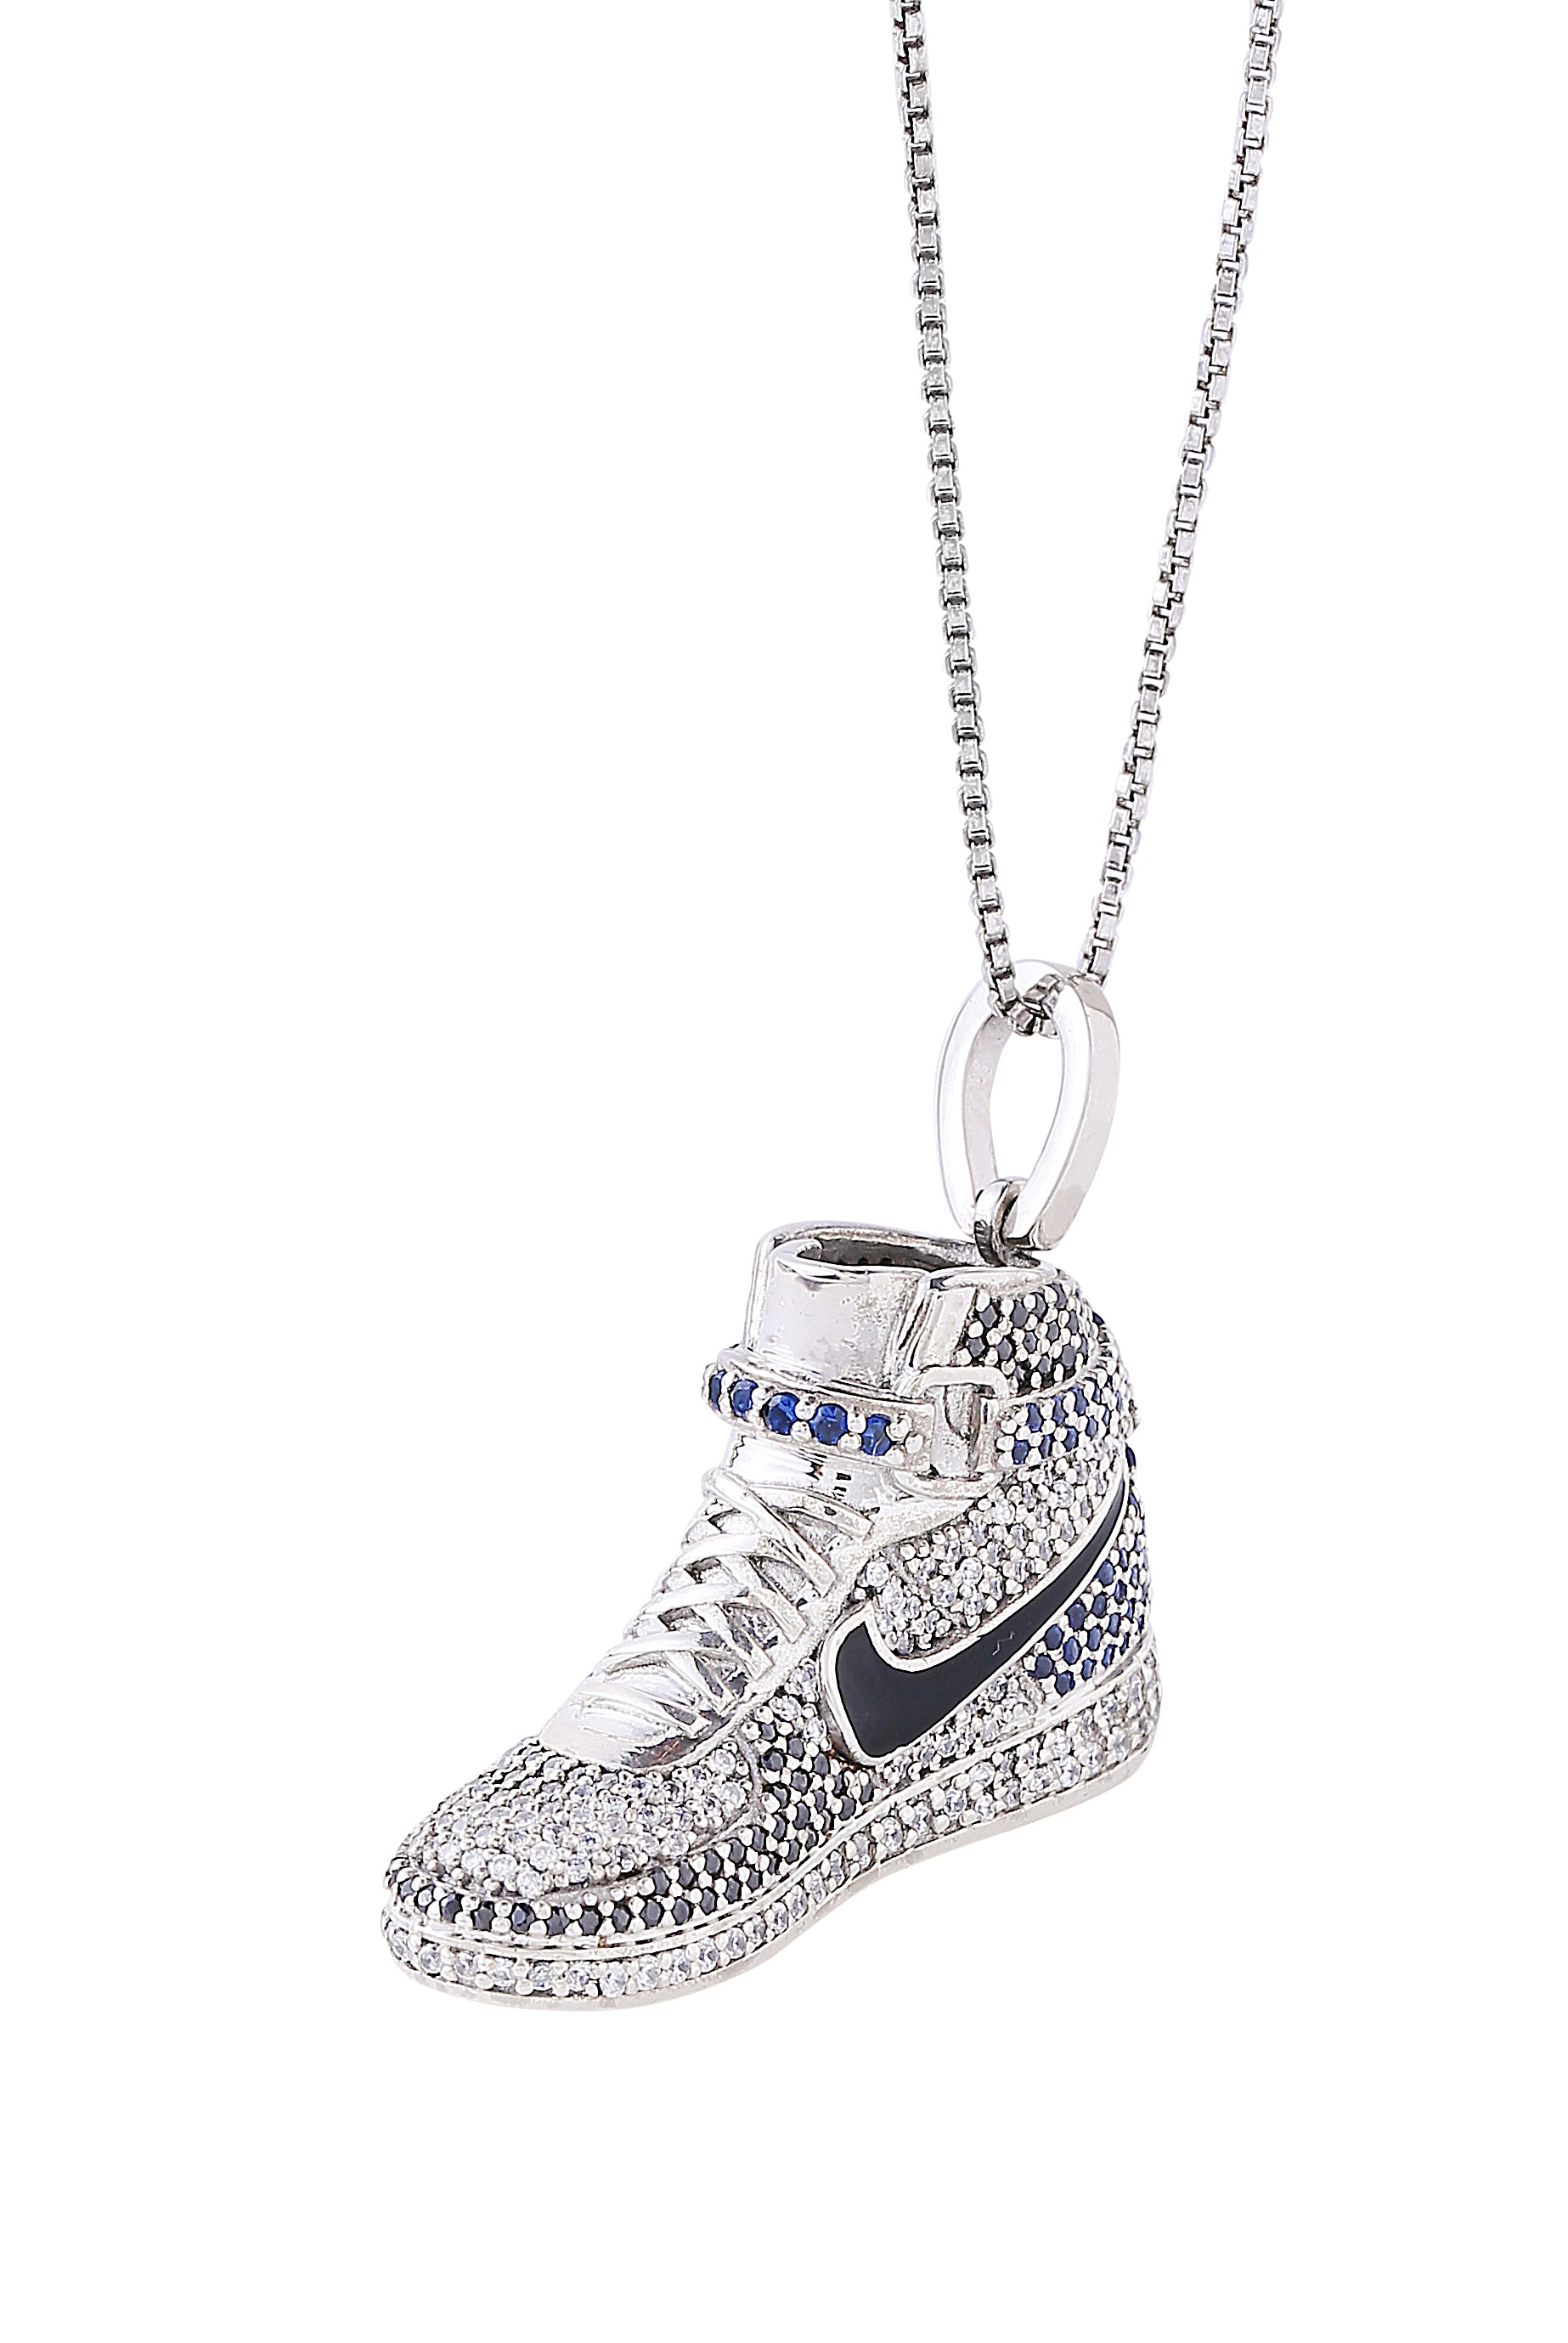 White Gold Color High Jordans Pendant Made of 925 Sterling Silver Material with 20 Inch Long Silver Chain